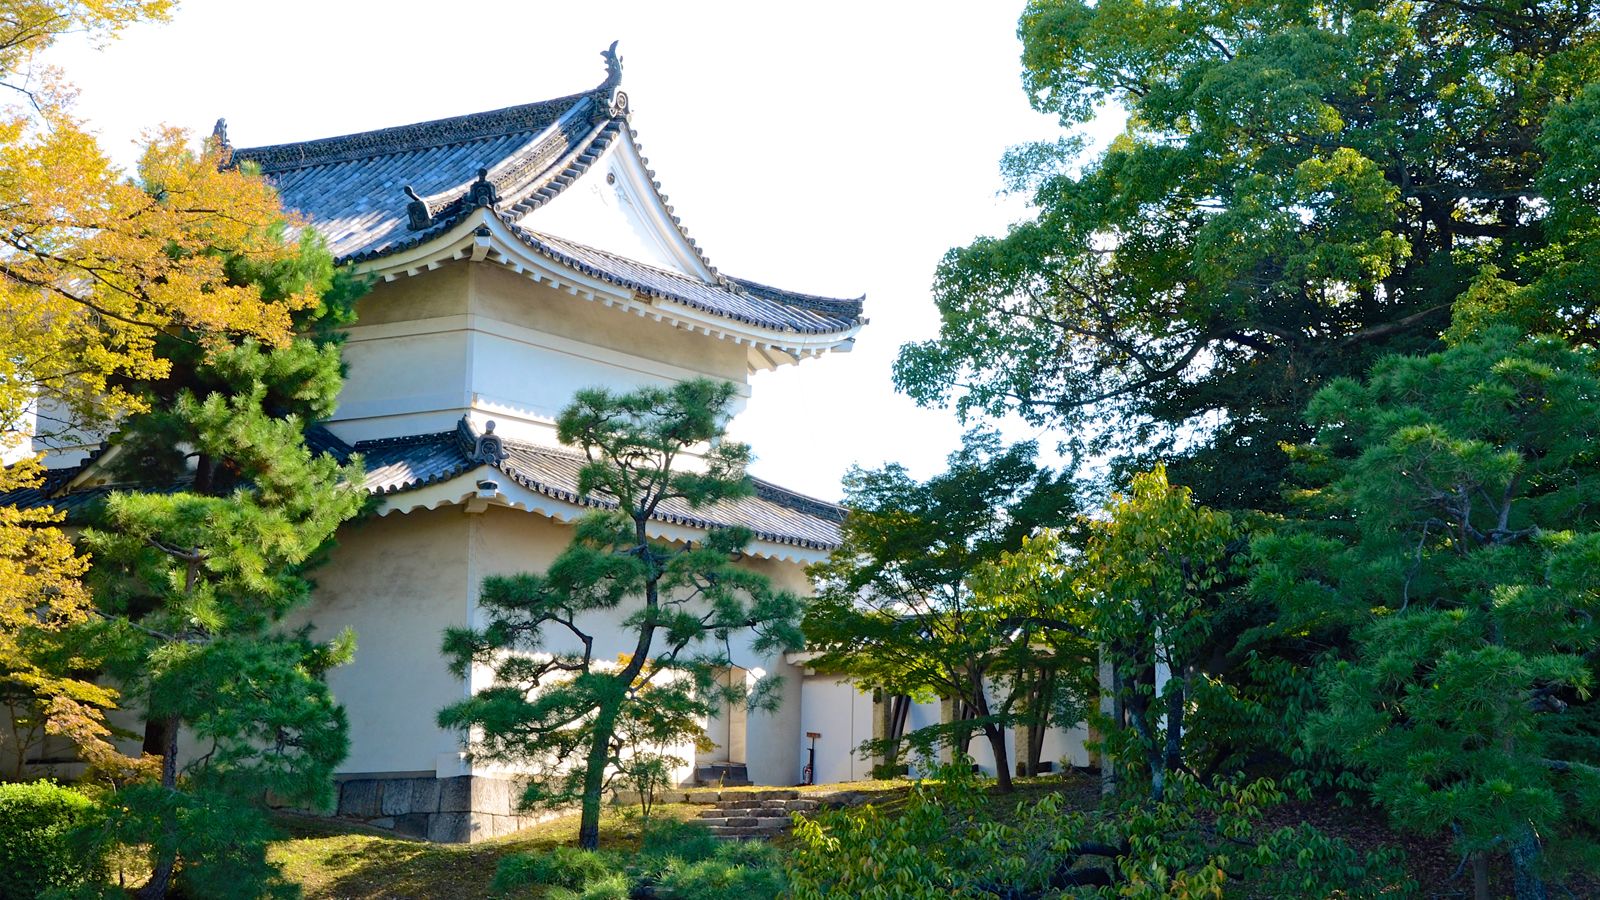 Shogun Stronghold: Samurai Castles in Japan - Travelogues from Remote Lands